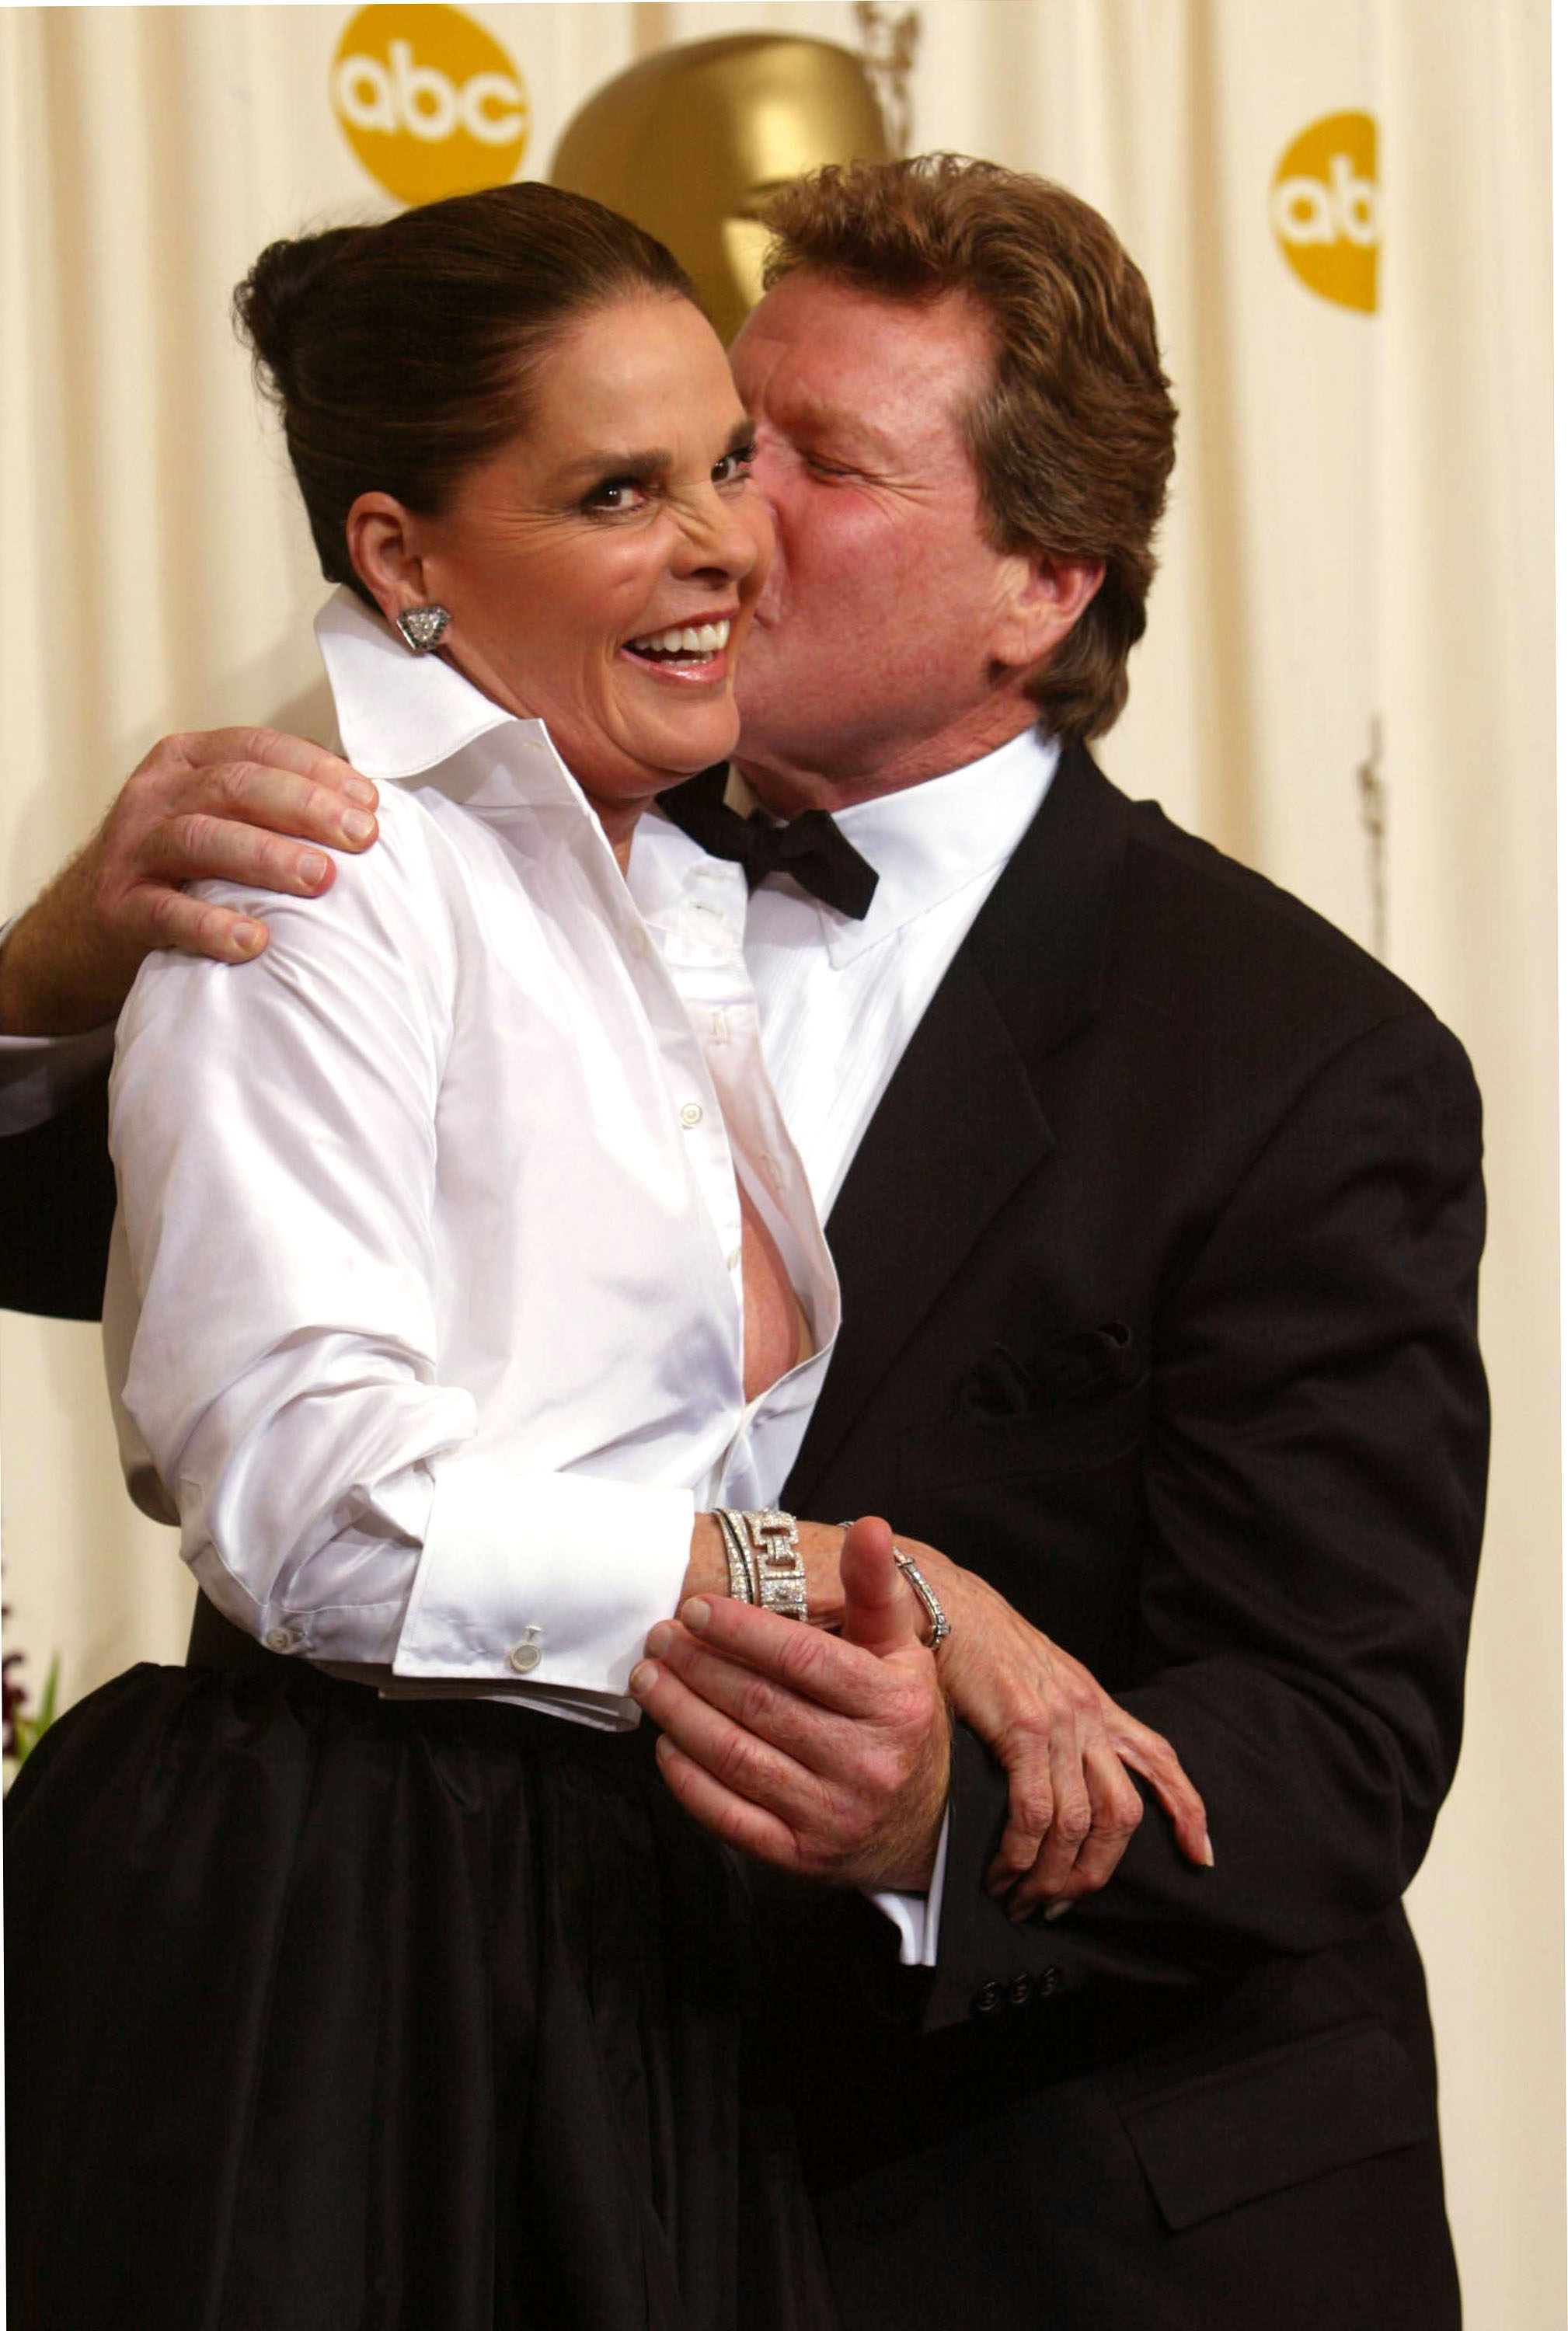 Ali MacGraw and Ryan O'Neal on March 24, 2002, in California, United States. | Source: Getty Images